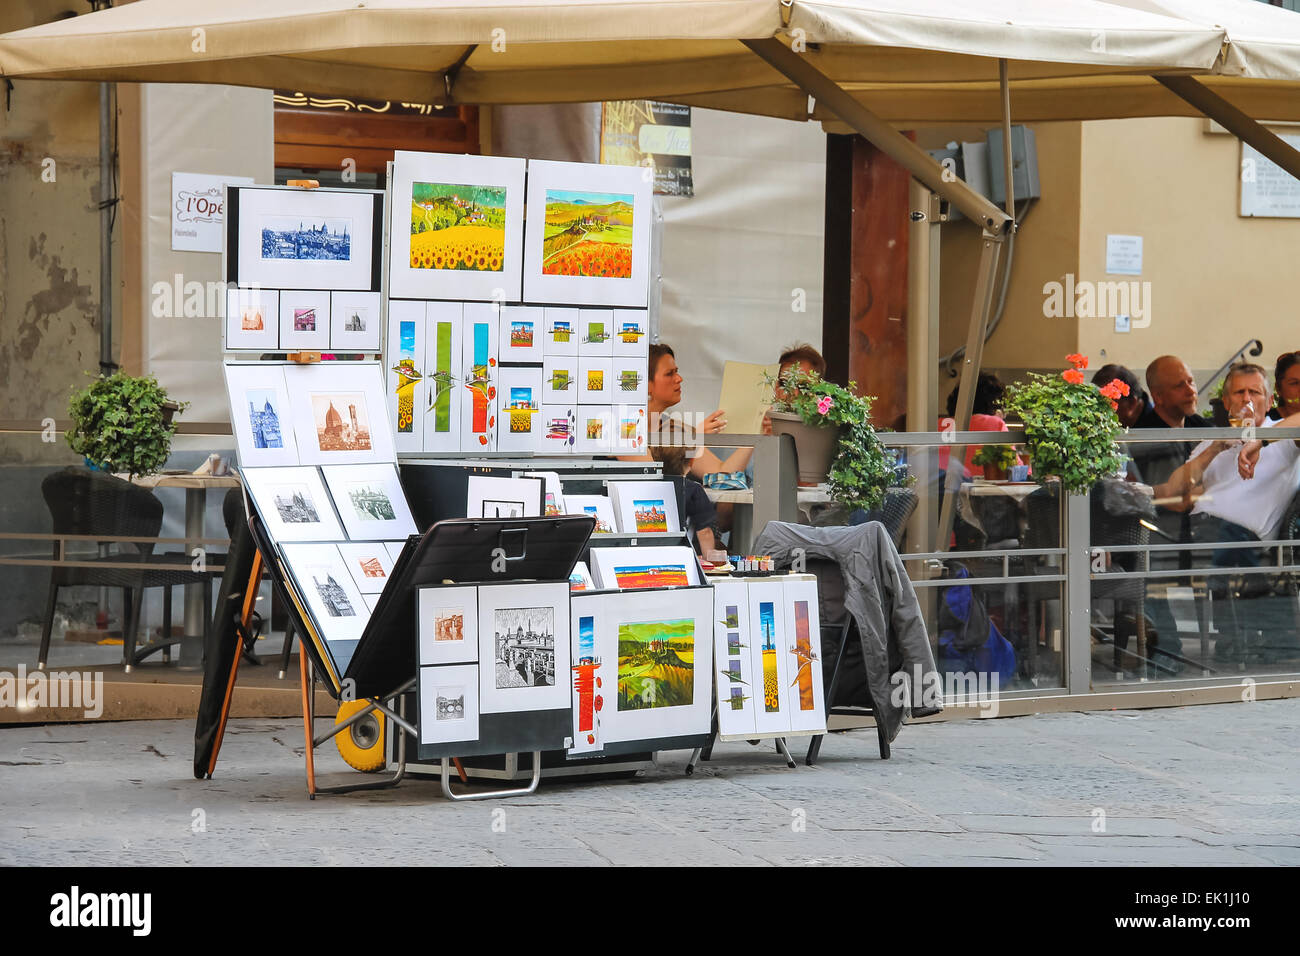 FLORENCE, ITALY - MAY 08, 2014: Equipment and drawings street artist outside restaurant in Florence, Italy Stock Photo